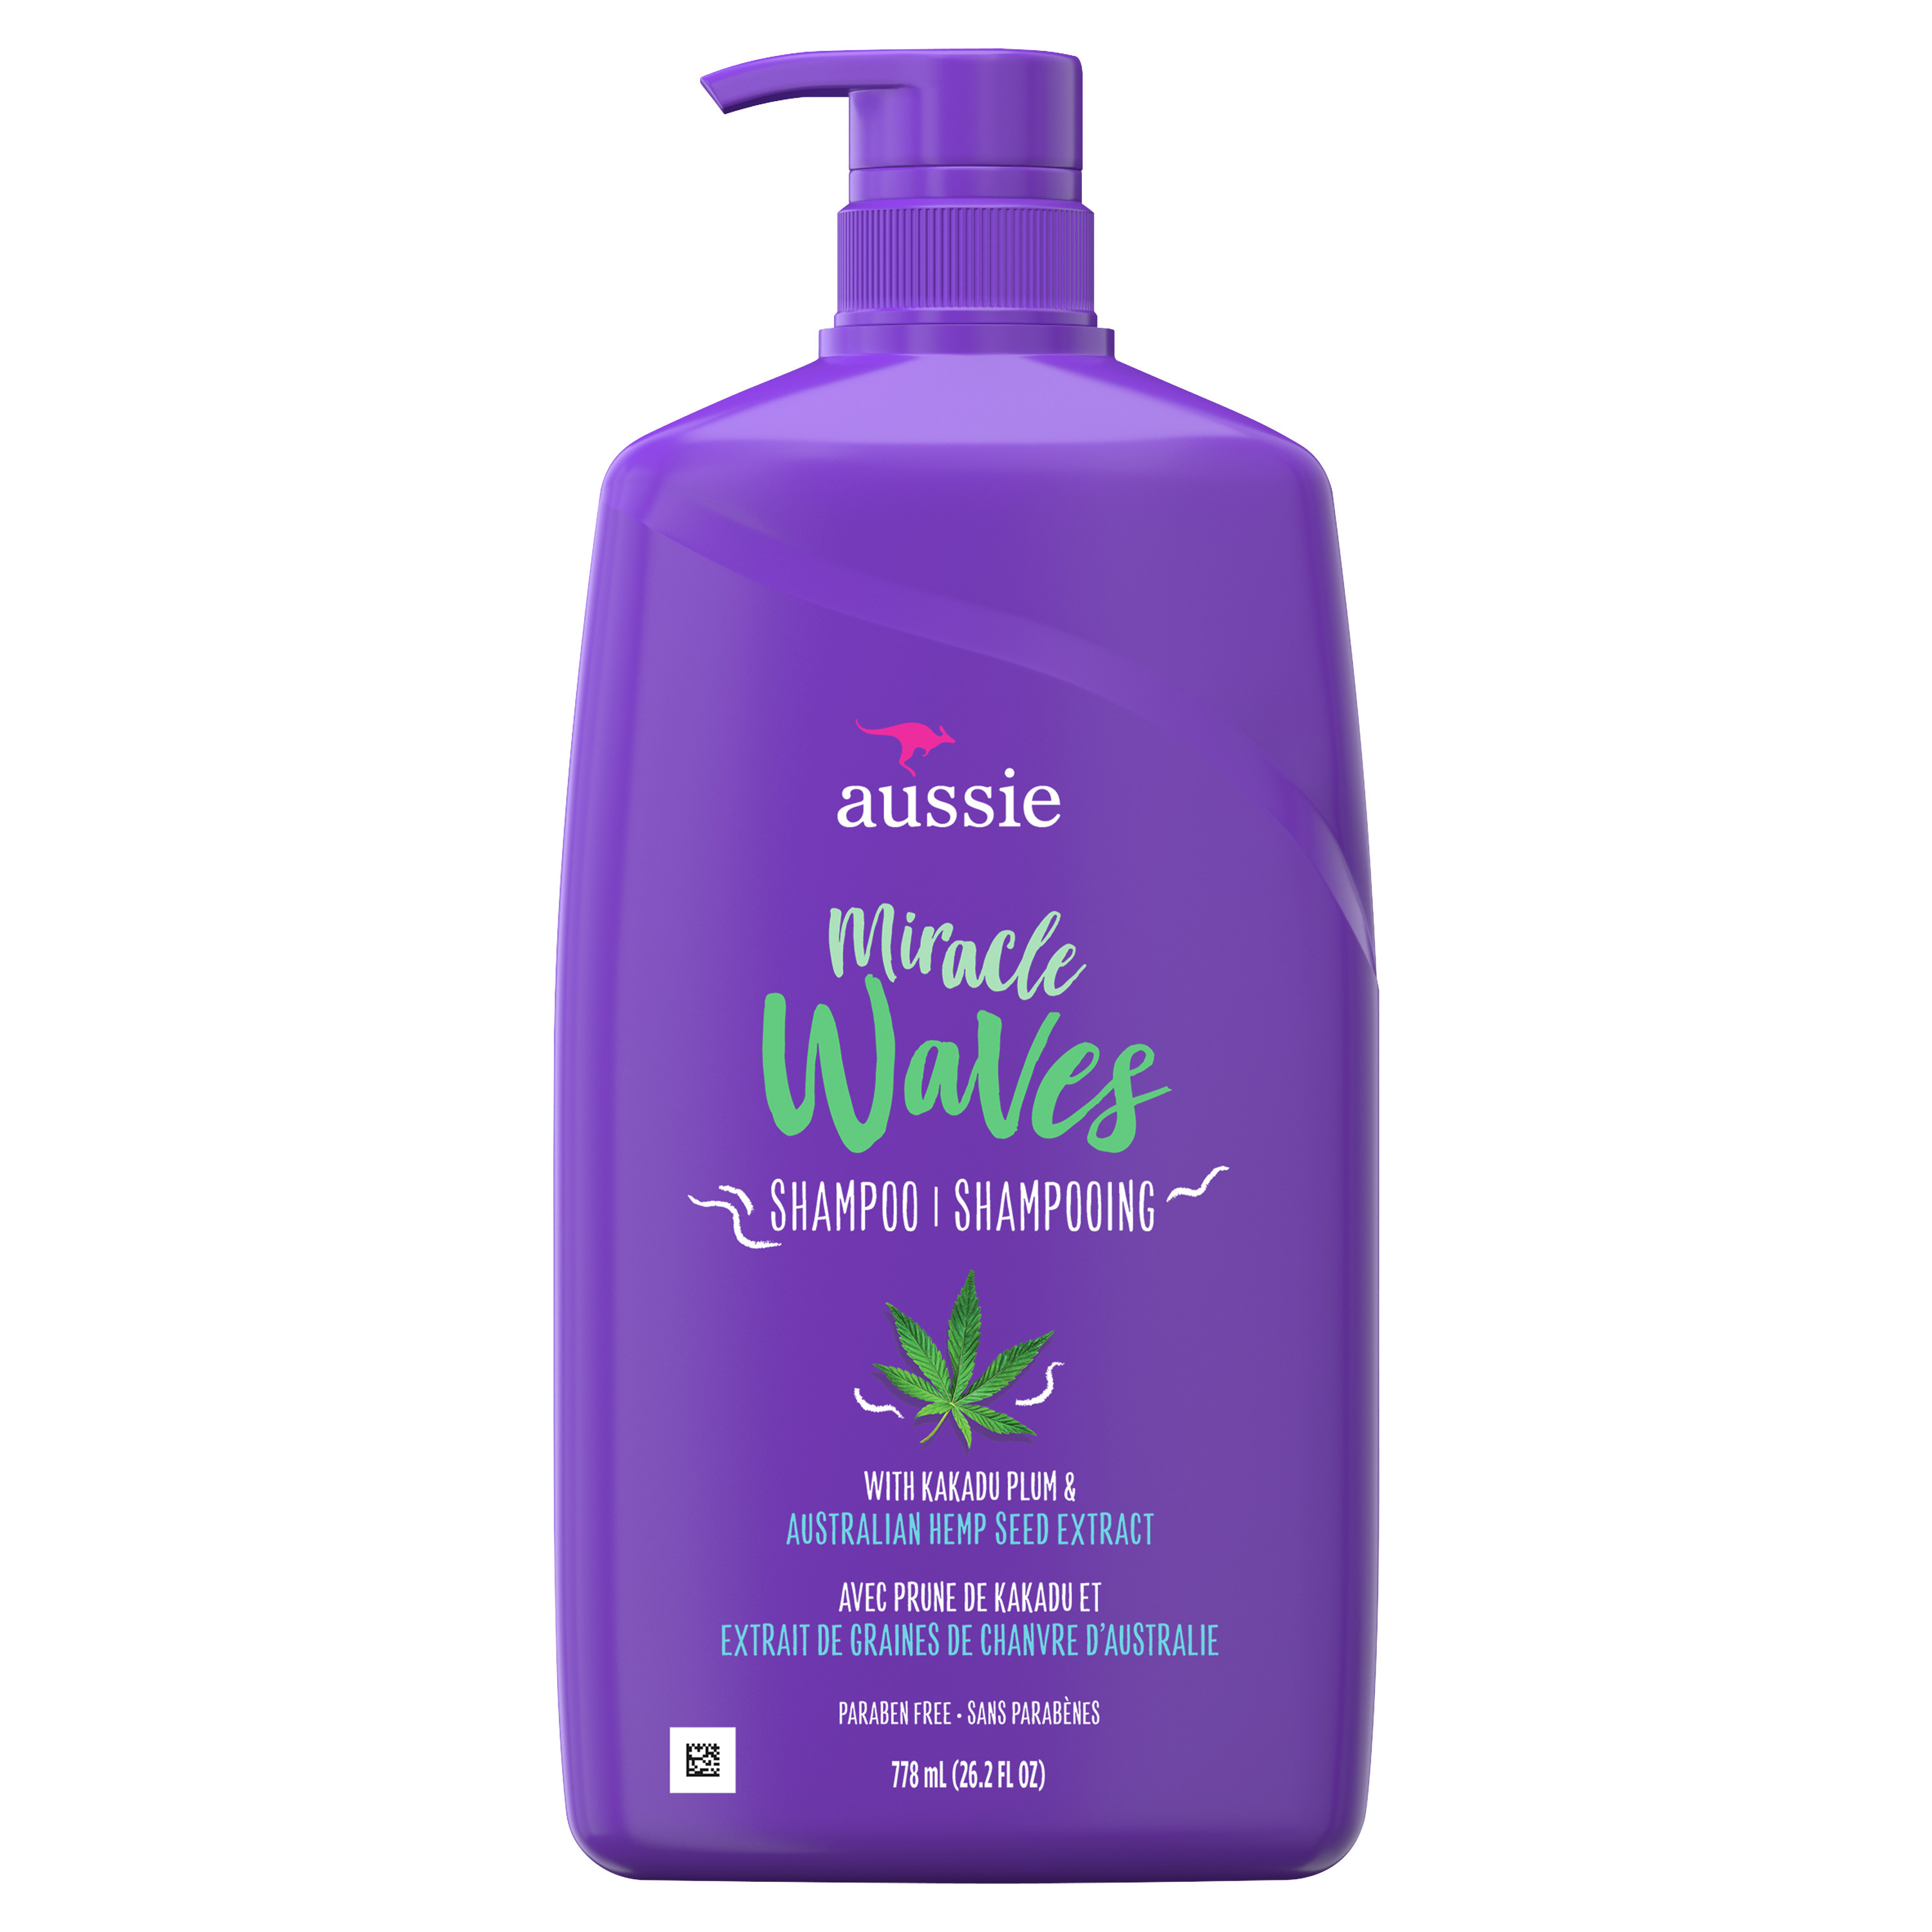 Aussie Miracle Waves Anti-Frizz Hemp Paraben-Free Shampoo, 26.2 fl oz for All Hair Types - image 1 of 8